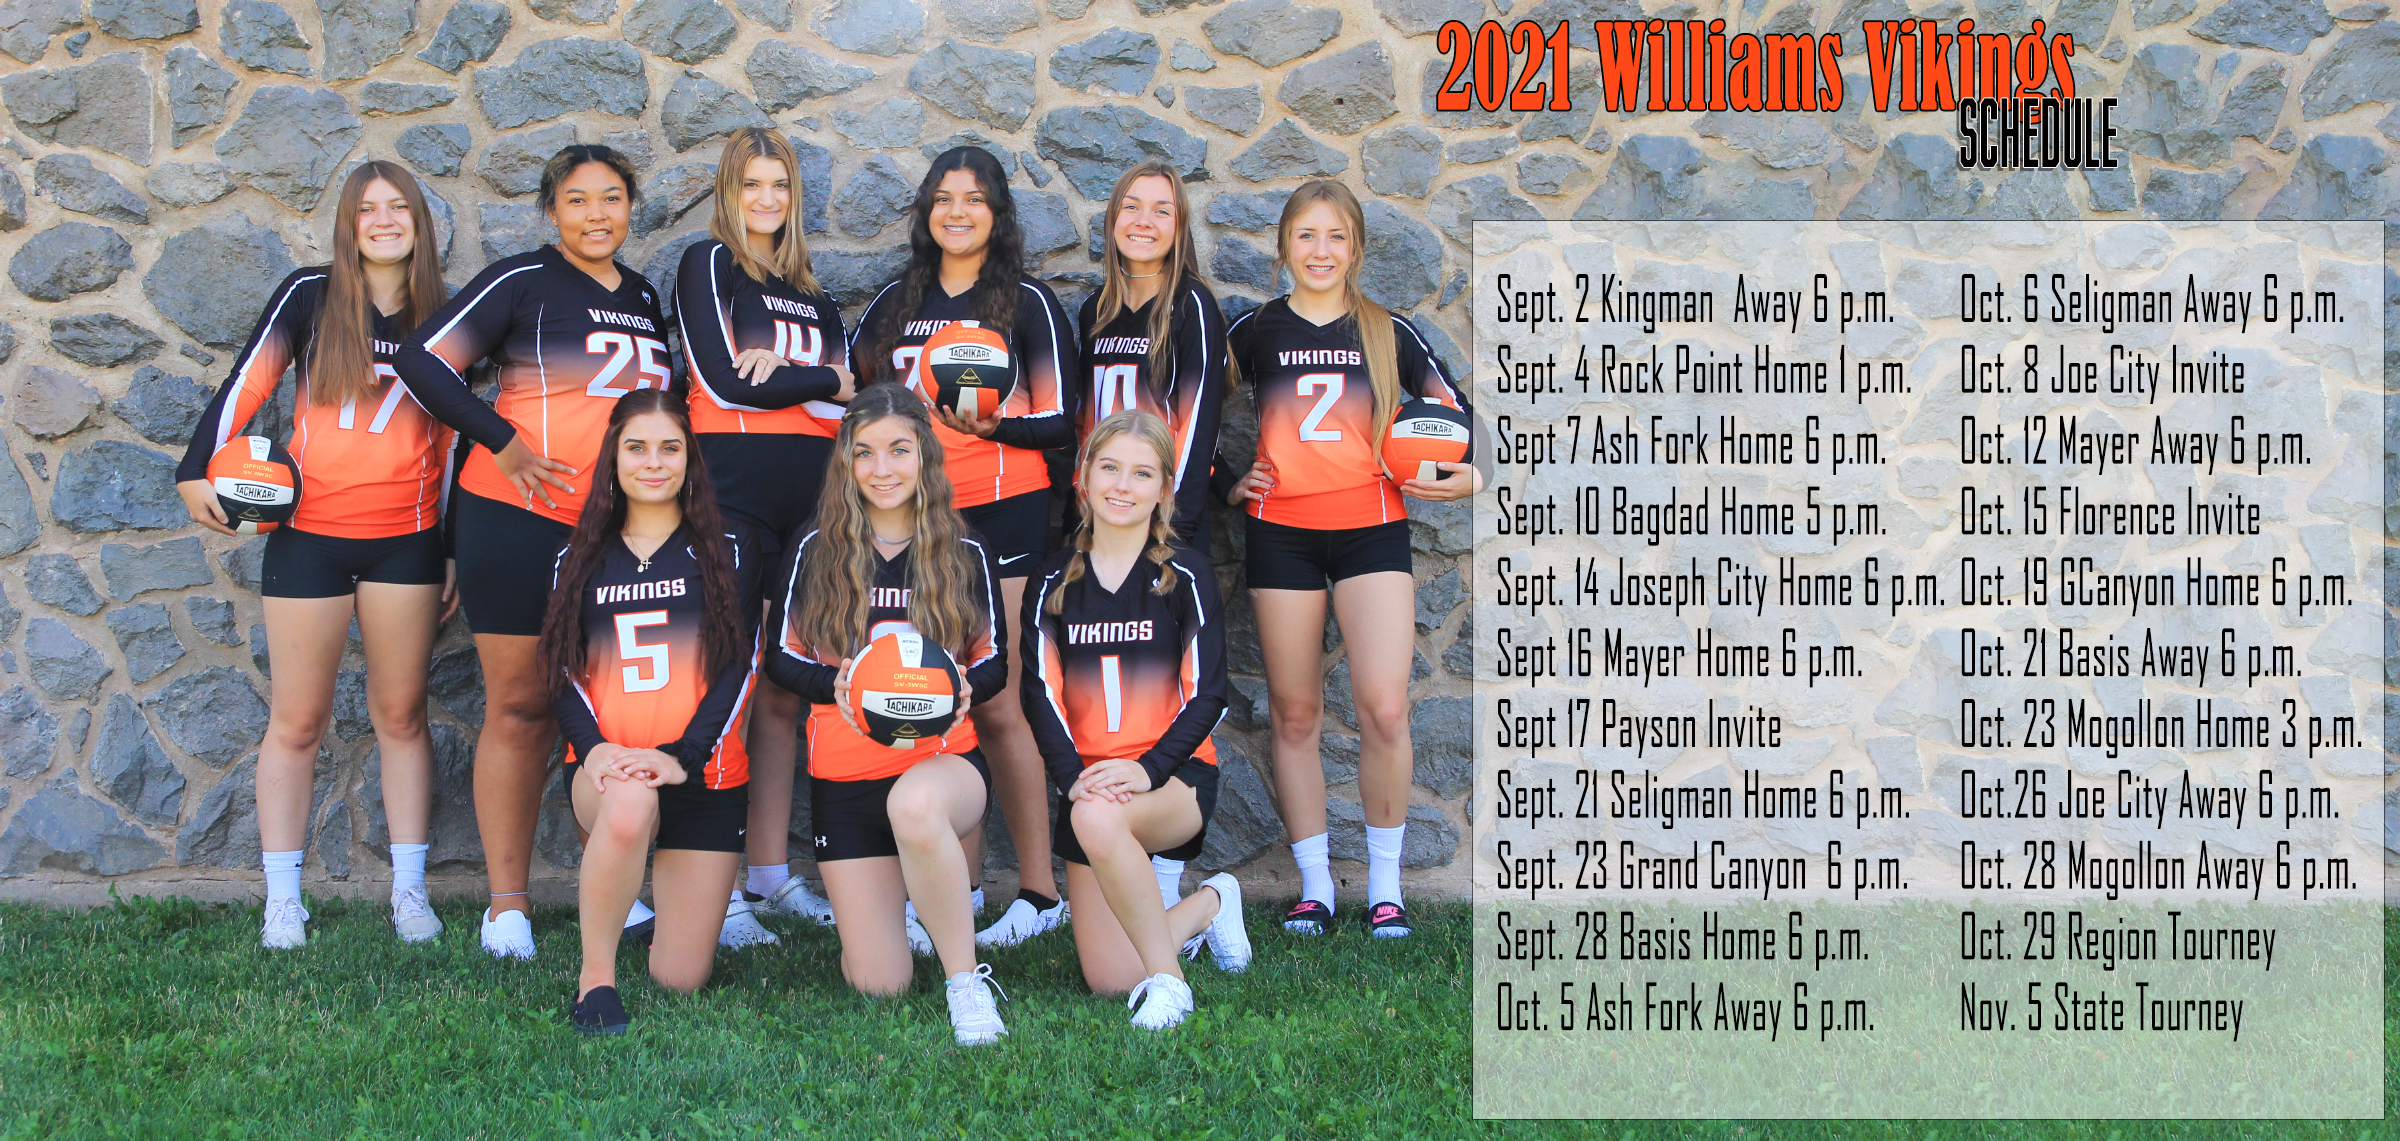 2021 Williams Vikings volleyball schedule